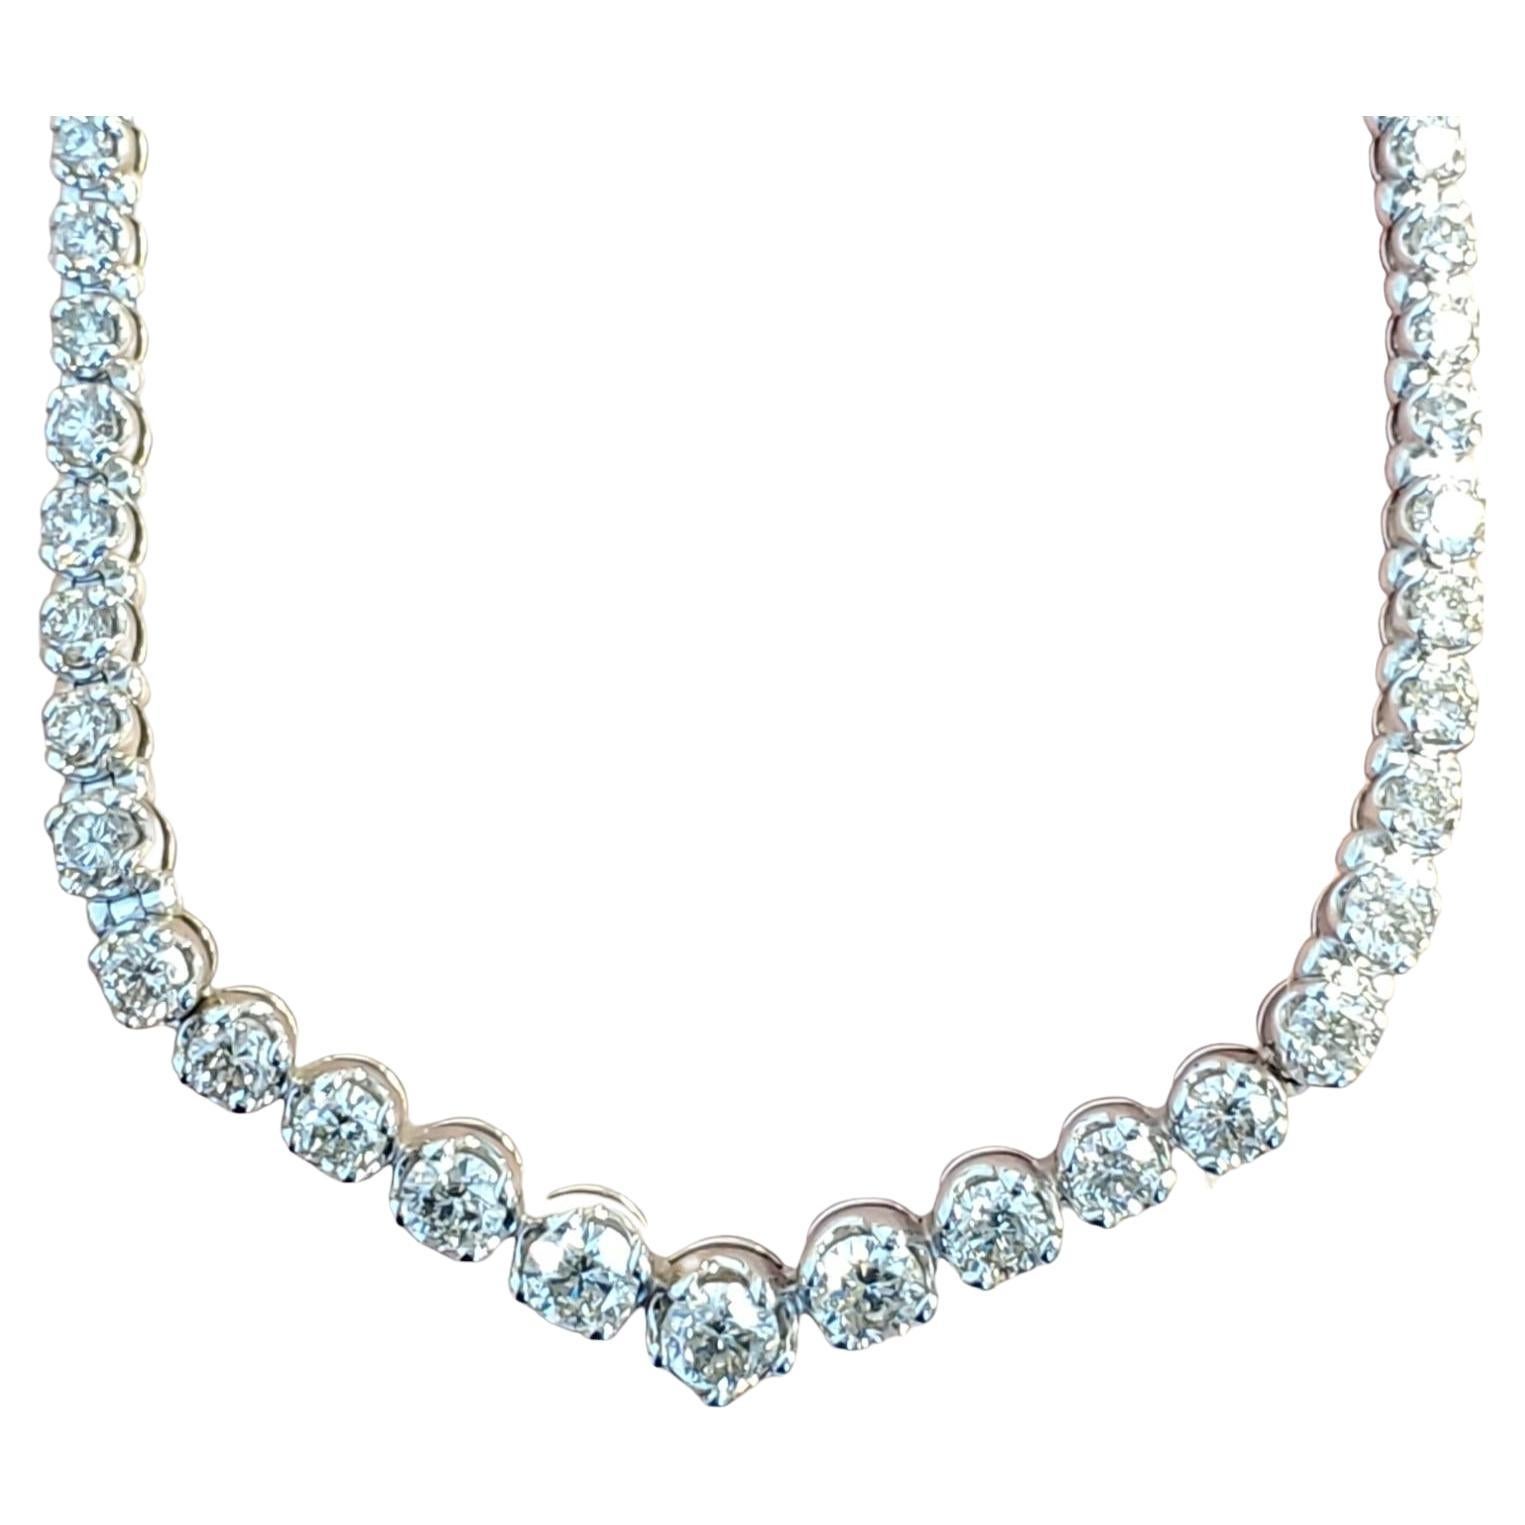 Rivieria Necklace 10k White Gold 4tcw Natural Diamonds For Sale